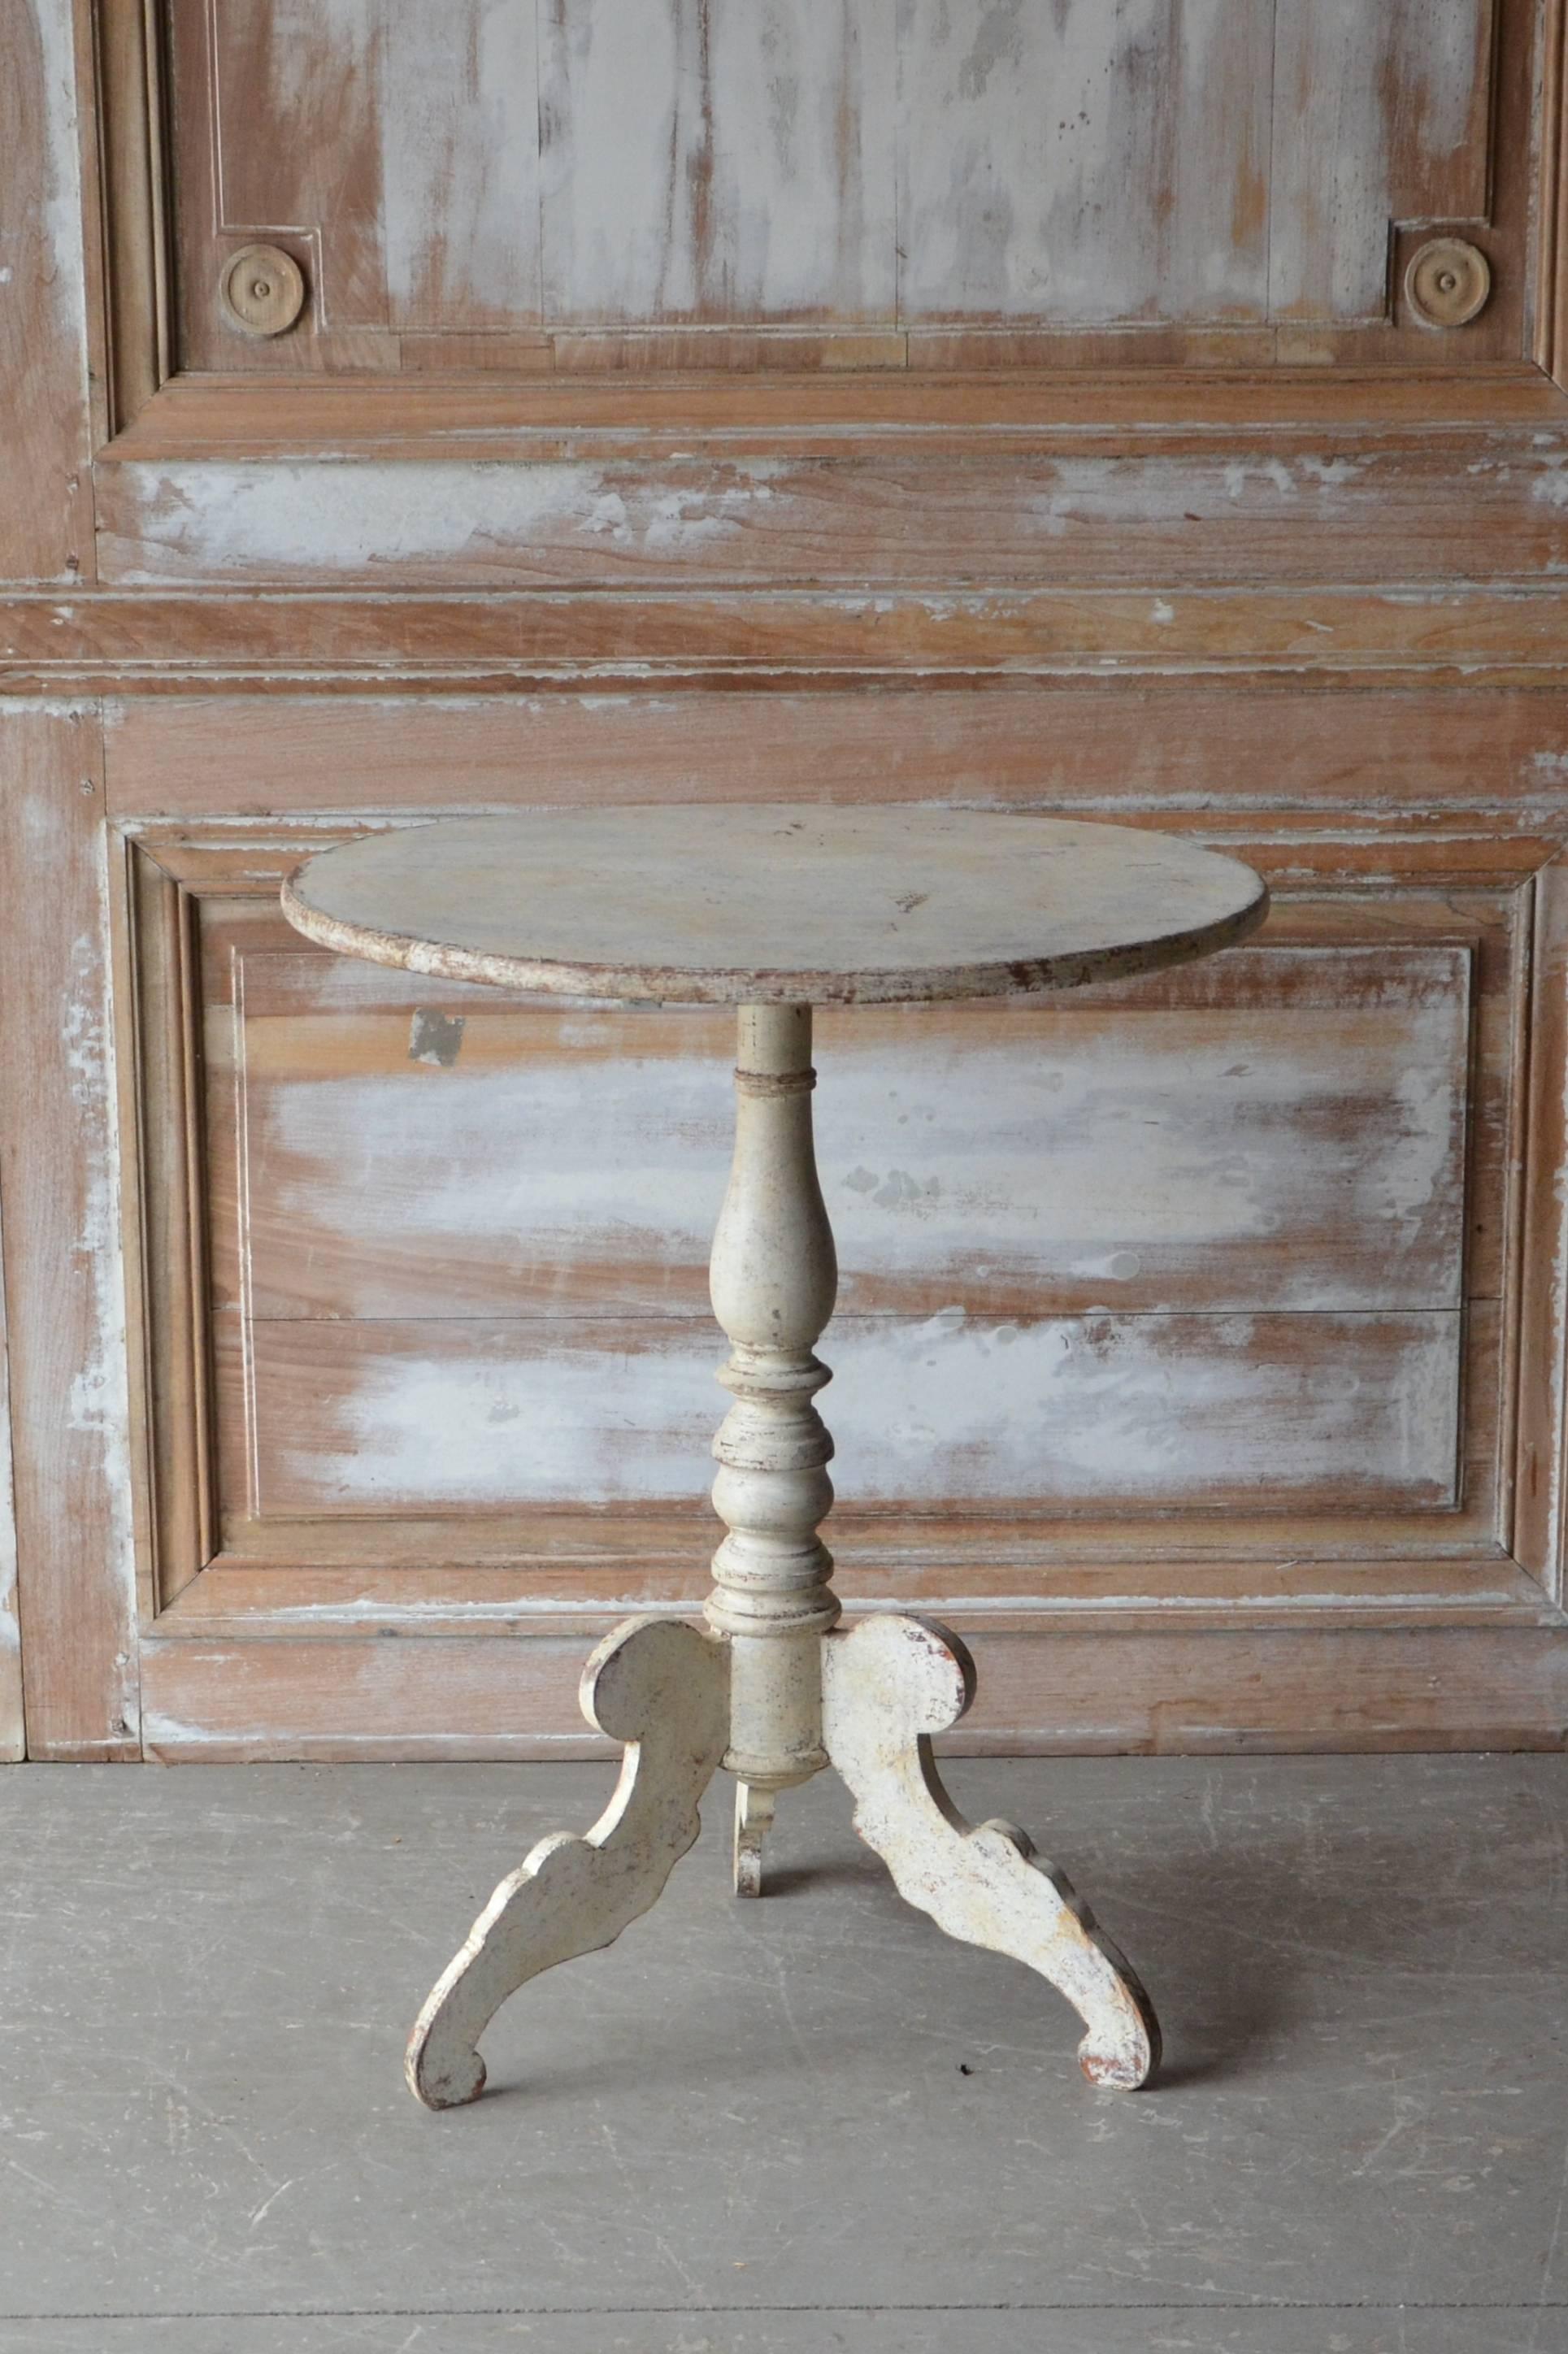 19th century Swedish tilt-top pedestal table, Karl Johan period, Sweden, circa 1830 with turned base supported by beautifully carved legs. 
Stockholm, Sweden